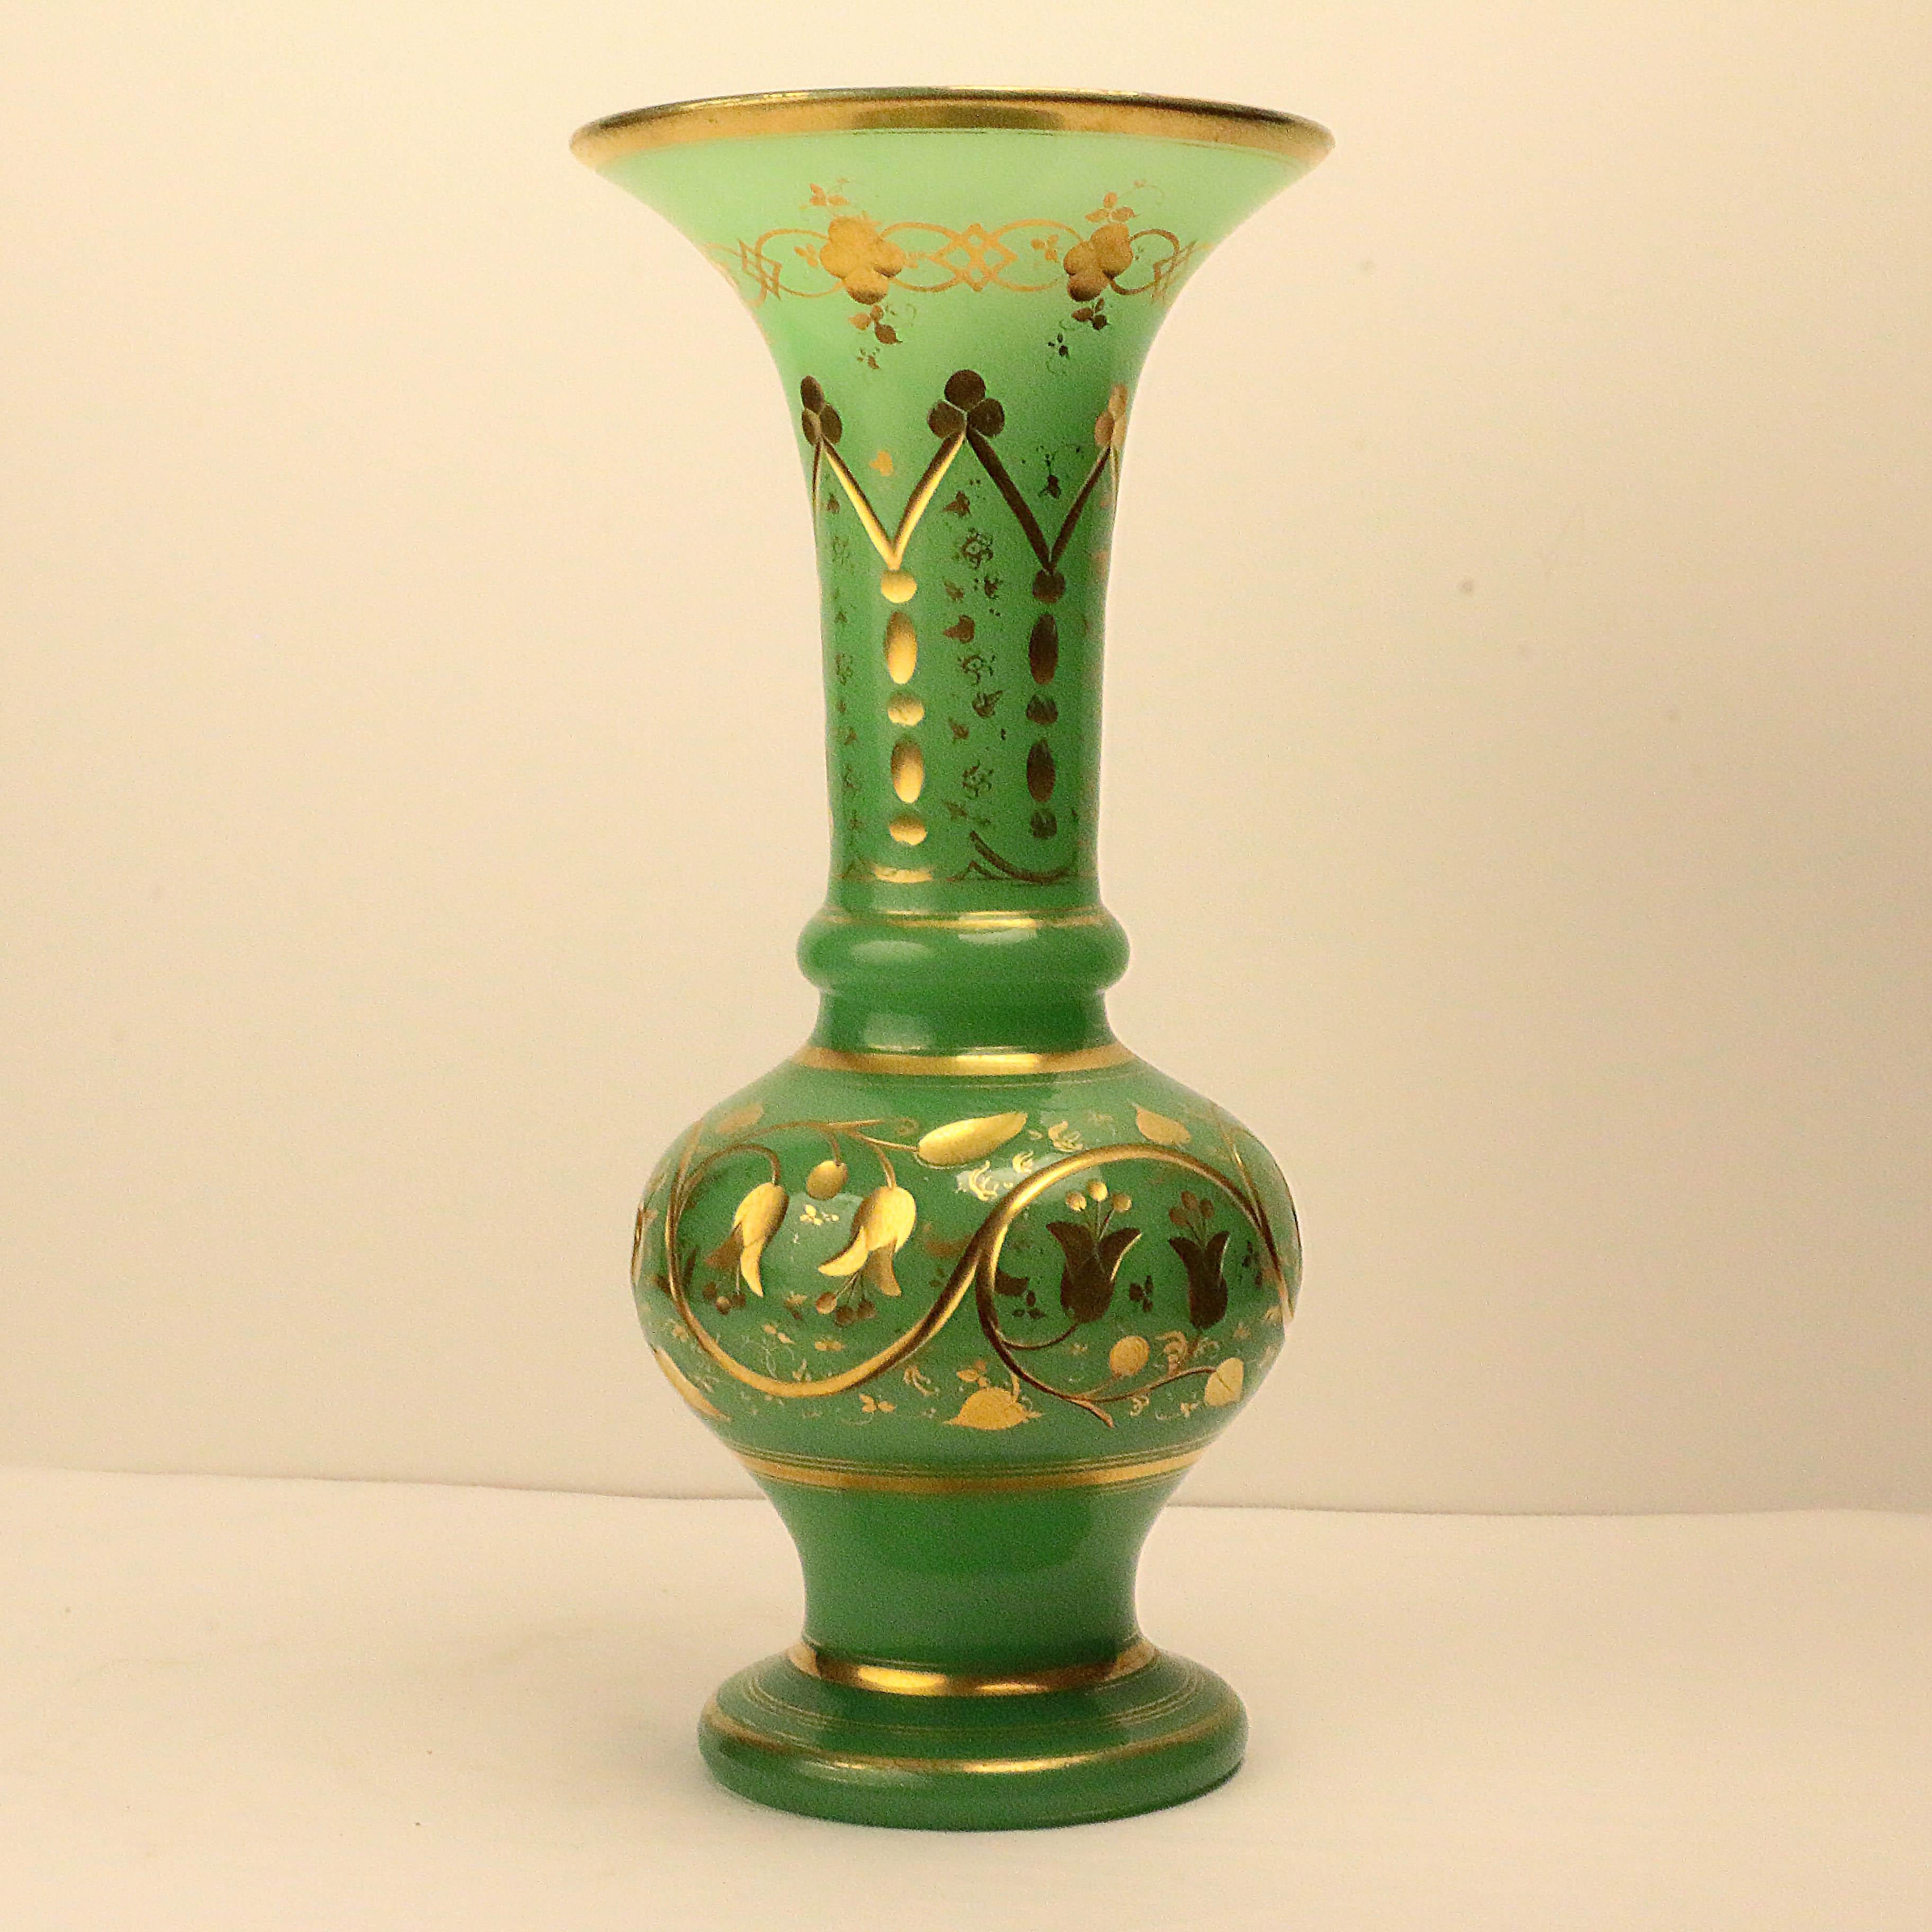 This vase is part of a Swiss collection we have recently acquired. This color enters the palette of French glass makers in the 1840s following experiments in manufacturing. This vase is beautifully blown by a master. raised on a round foot to a